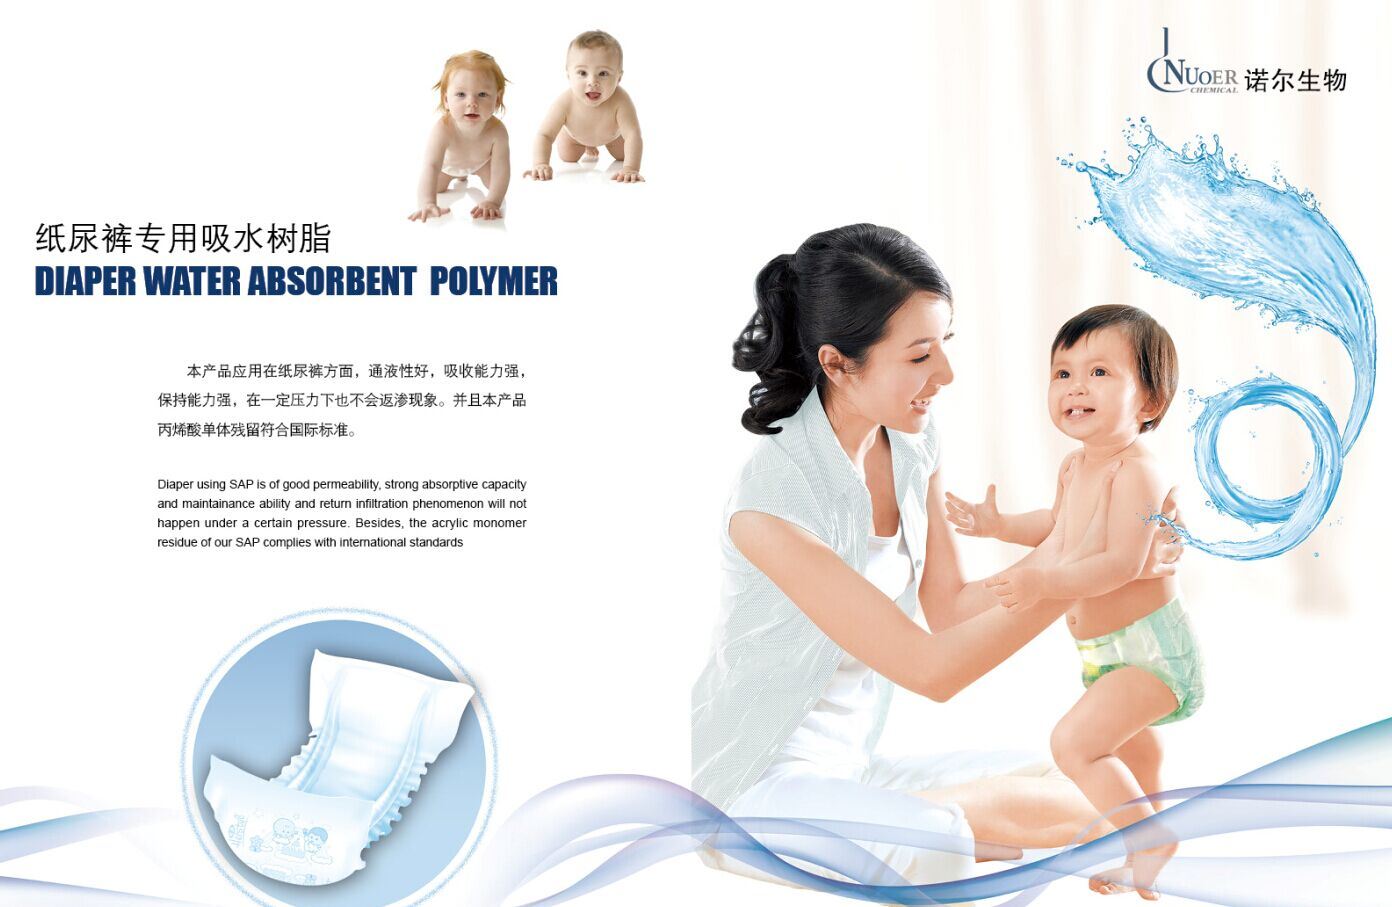 Super Absorbent Polymer for Paper Diaper/Sanitary Napkin (NUOERFLOC)